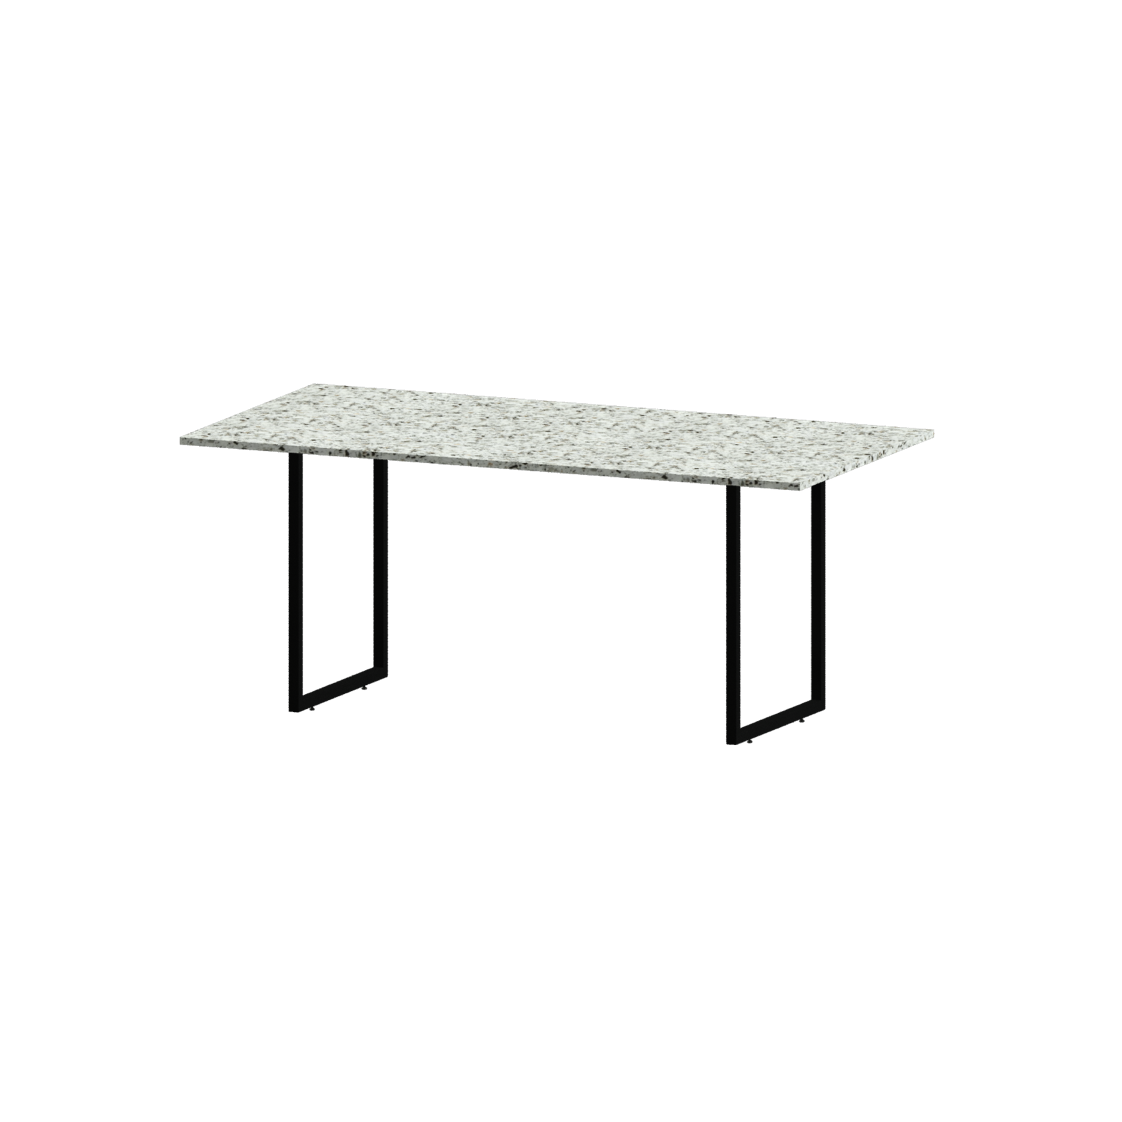 DINING TABLE, RECTANGLE, SMALL - Customer's Product with price 5500.00 ID 3aLbhhdYKg7KrlOhkROSZCnS